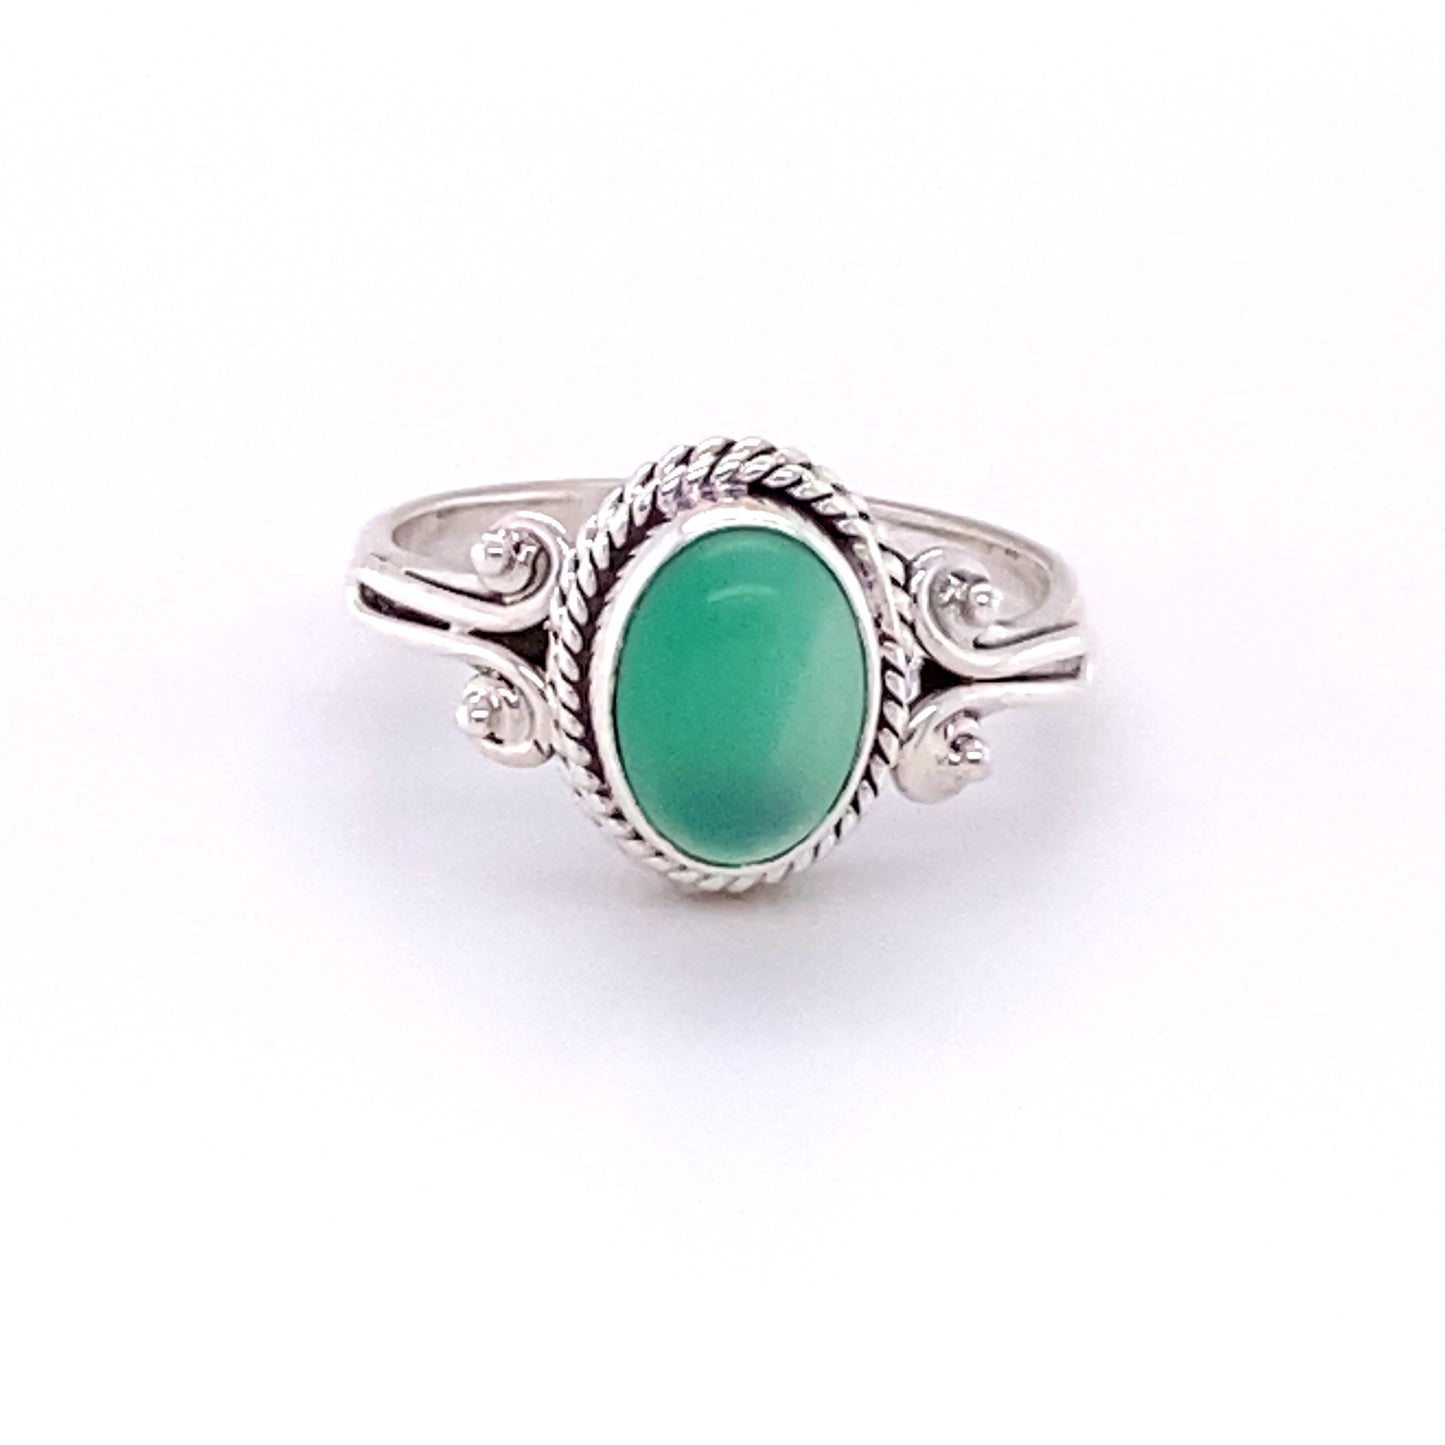 An Oval Natural Gemstone Ring with Rope and Long Spiral Border with a vibrant green stone.